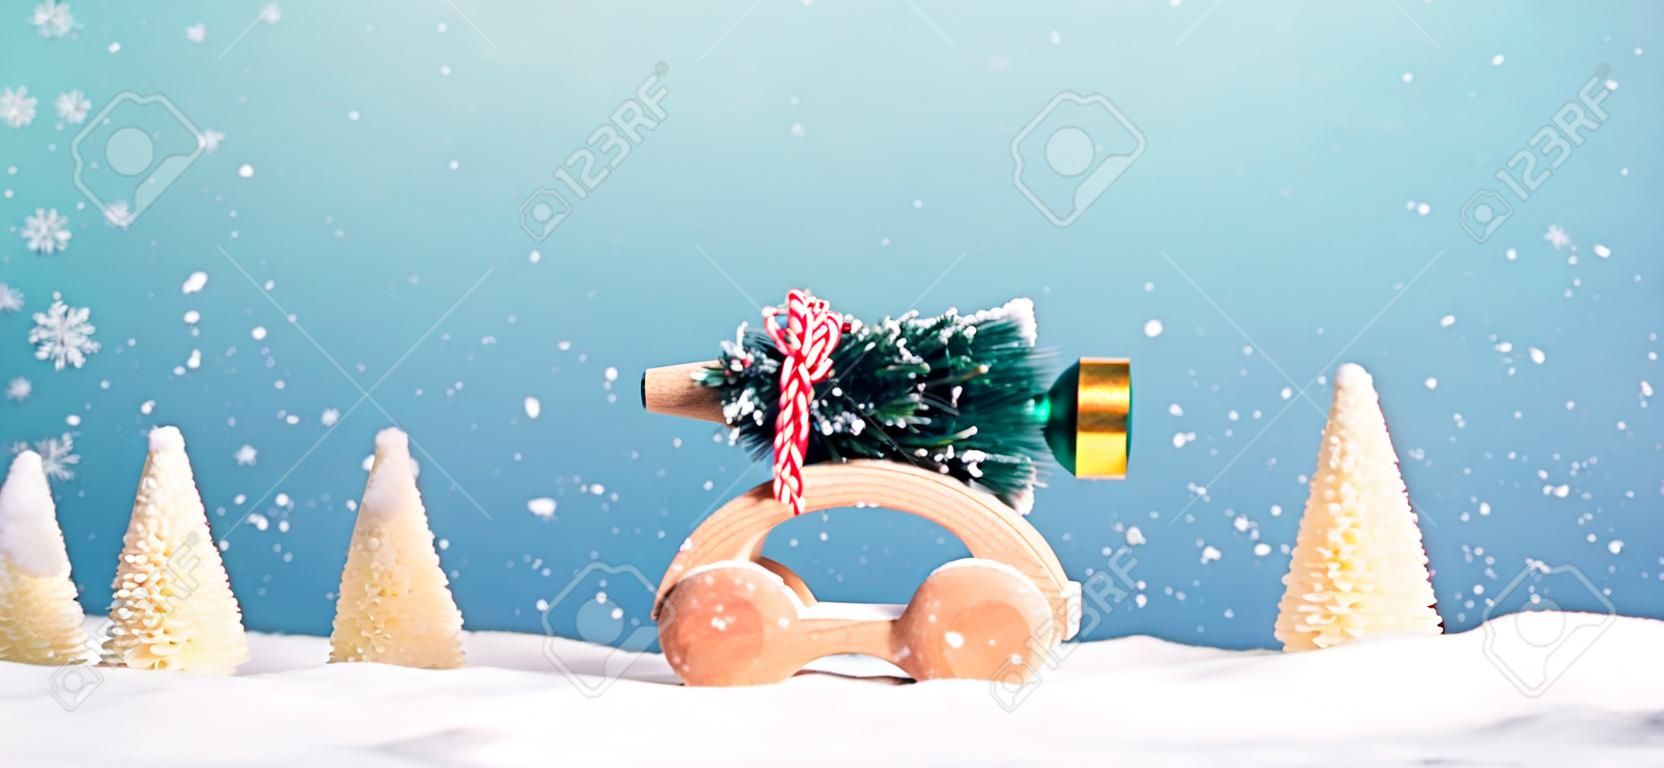 Miniature wooden car carrying a Christmas tree on a blue background